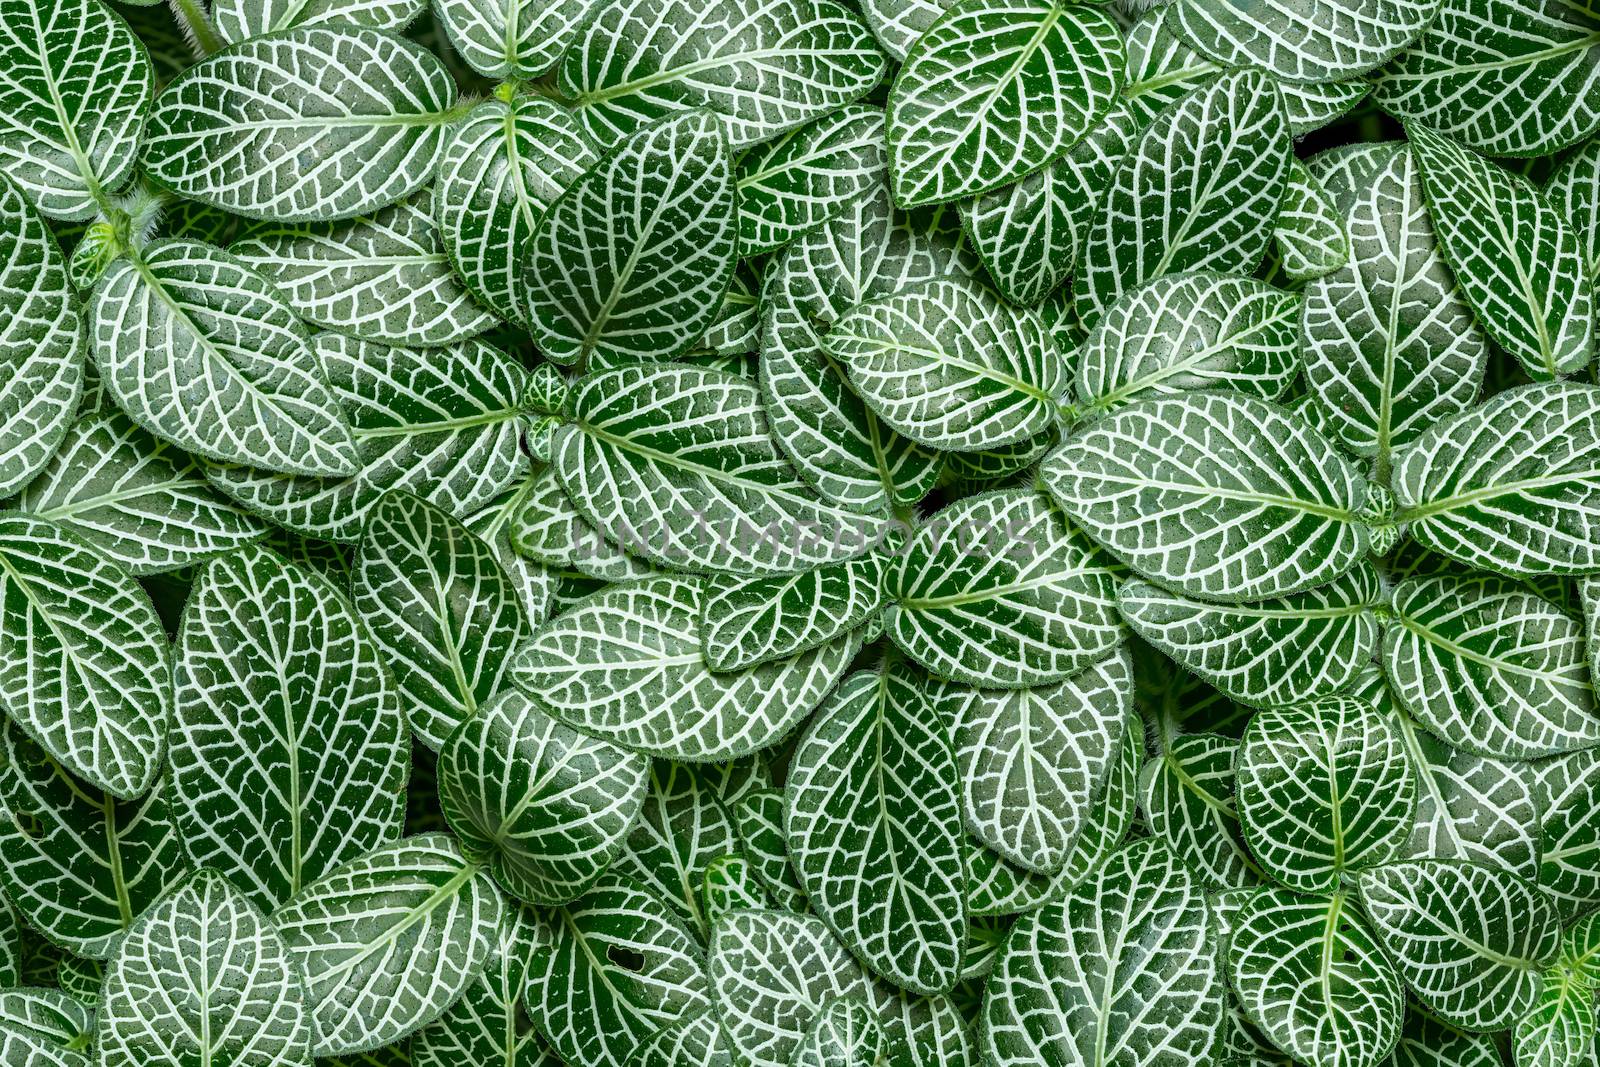 Fittonia albivenis by smuay